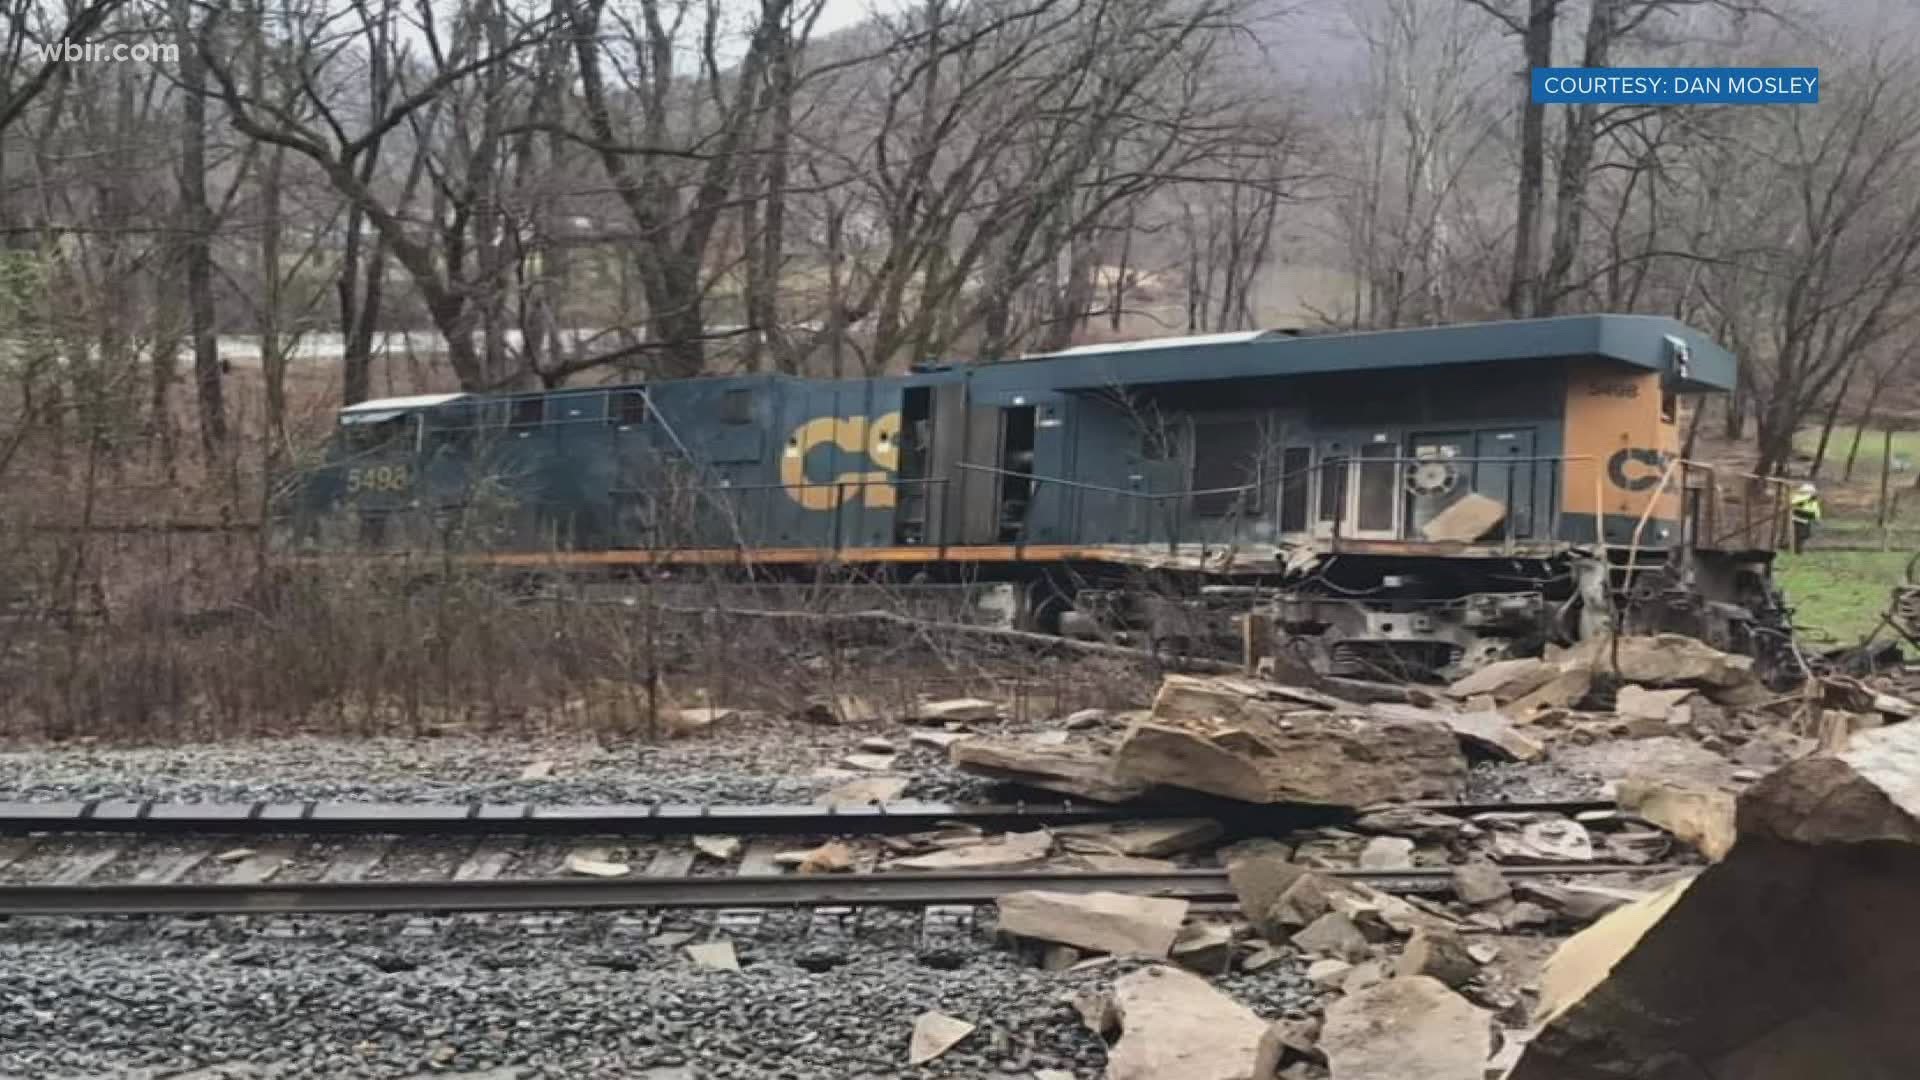 A massive rockslide in Harlan County, Kentucky caused a train to derail early Thursday morning.